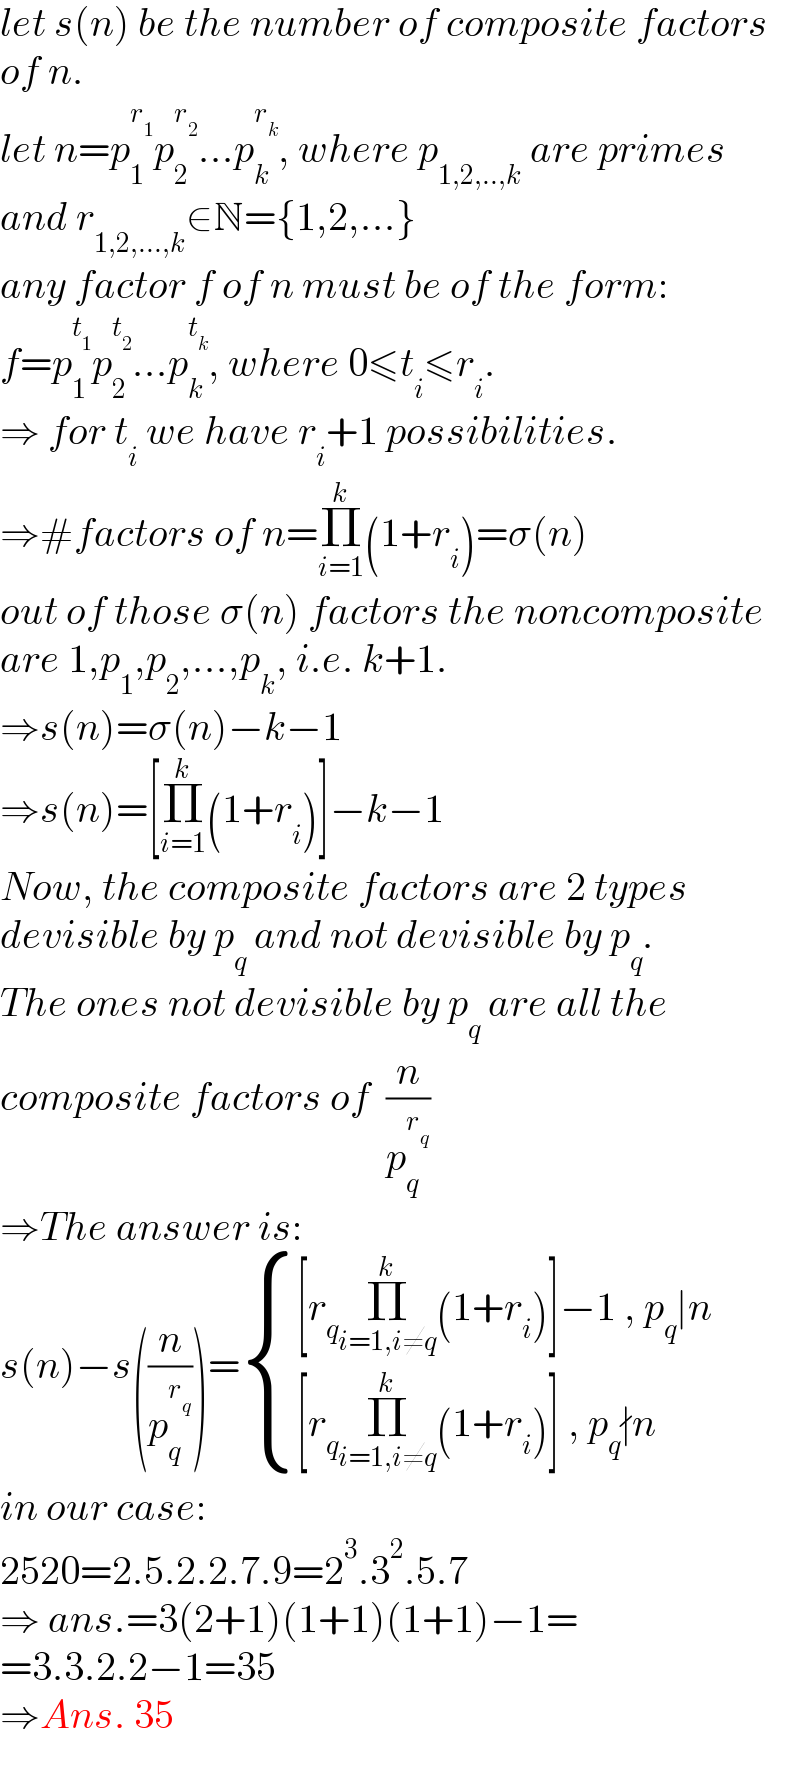 let s(n) be the number of composite factors  of n.  let n=p_1 ^r_1  p_2 ^r_2  ...p_k ^r_k  , where p_(1,2,..,k)  are primes  and r_(1,2,...,k) ∈N={1,2,...}  any factor f of n must be of the form:  f=p_1 ^t_1  p_2 ^t_2  ...p_k ^t_k  , where 0≤t_i ≤r_i .  ⇒ for t_i  we have r_i +1 possibilities.  ⇒#factors of n=Π_(i=1) ^k (1+r_i )=σ(n)  out of those σ(n) factors the noncomposite  are 1,p_1 ,p_2 ,...,p_k , i.e. k+1.  ⇒s(n)=σ(n)−k−1  ⇒s(n)=[Π_(i=1) ^k (1+r_i )]−k−1  Now, the composite factors are 2 types  devisible by p_q  and not devisible by p_q .  The ones not devisible by p_q  are all the   composite factors of  (n/p_q ^r_q  )  ⇒The answer is:  s(n)−s((n/p_q ^r_q  ))= { (([r_q Π_(i=1,i≠q) ^k (1+r_i )]−1 , p_q ∣n)),(([r_q Π_(i=1,i≠q) ^k (1+r_i )] , p_q ∤n)) :}  in our case:  2520=2.5.2.2.7.9=2^3 .3^2 .5.7  ⇒ ans.=3(2+1)(1+1)(1+1)−1=  =3.3.2.2−1=35  ⇒Ans. 35  